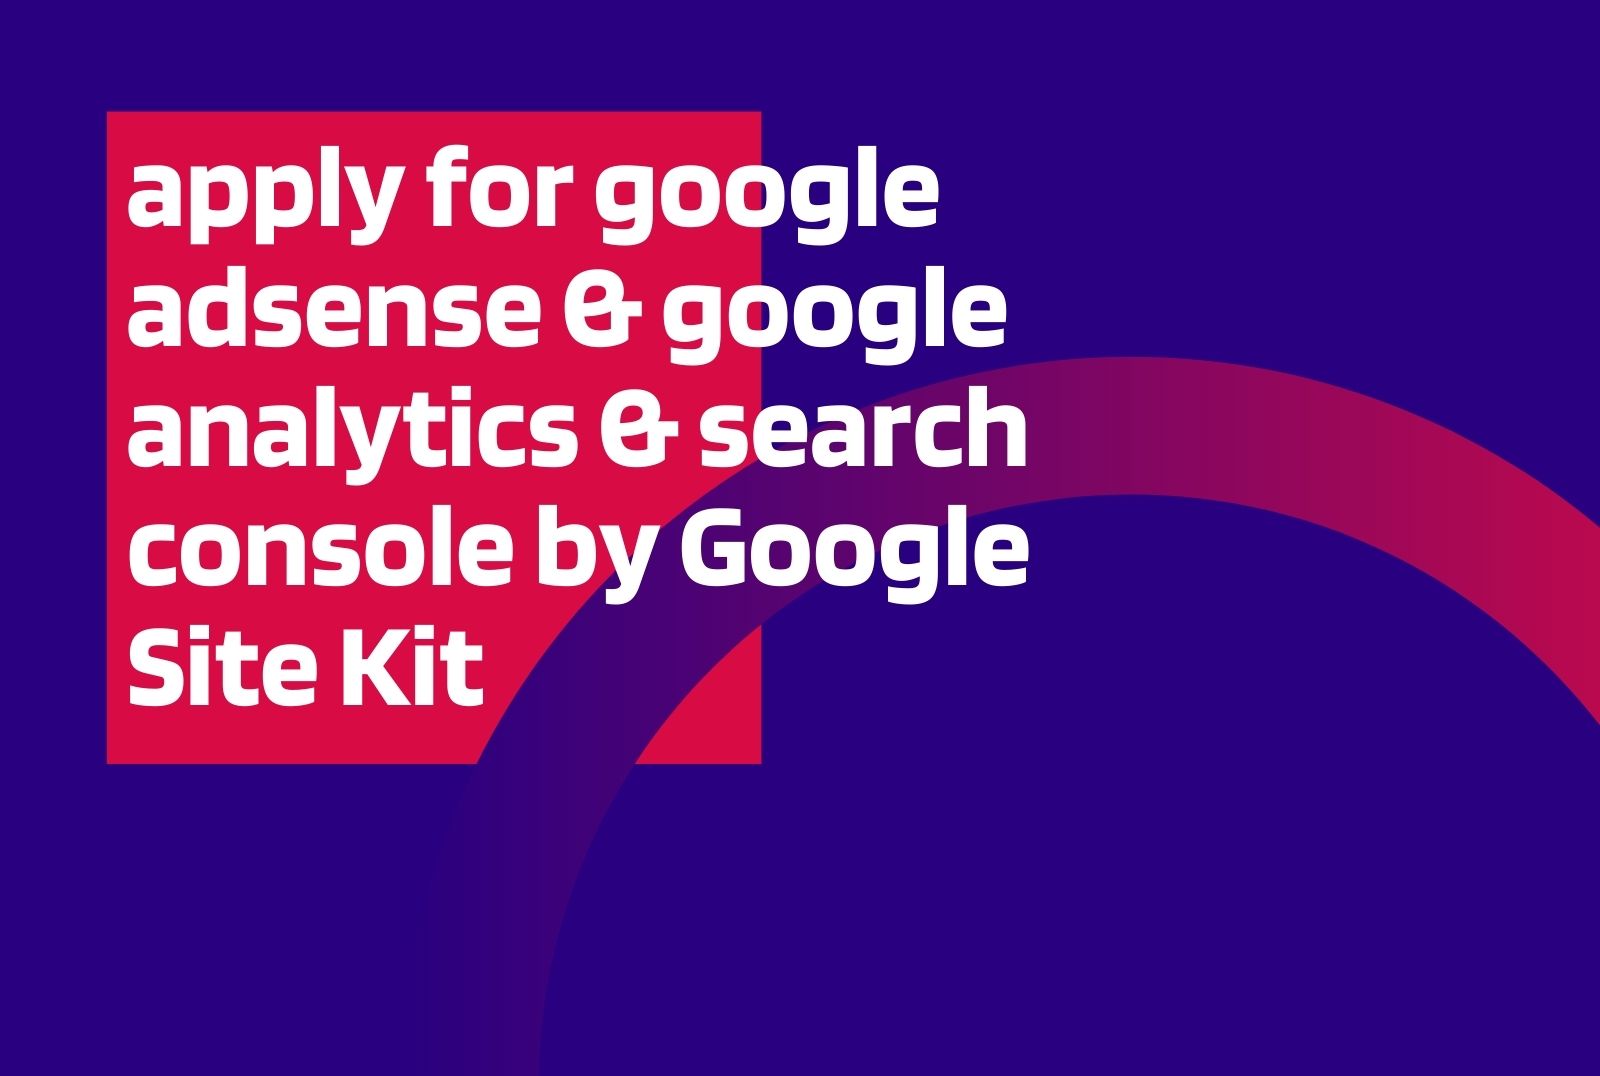 apply for google adsense & google analytics & search console by Google Site Kit